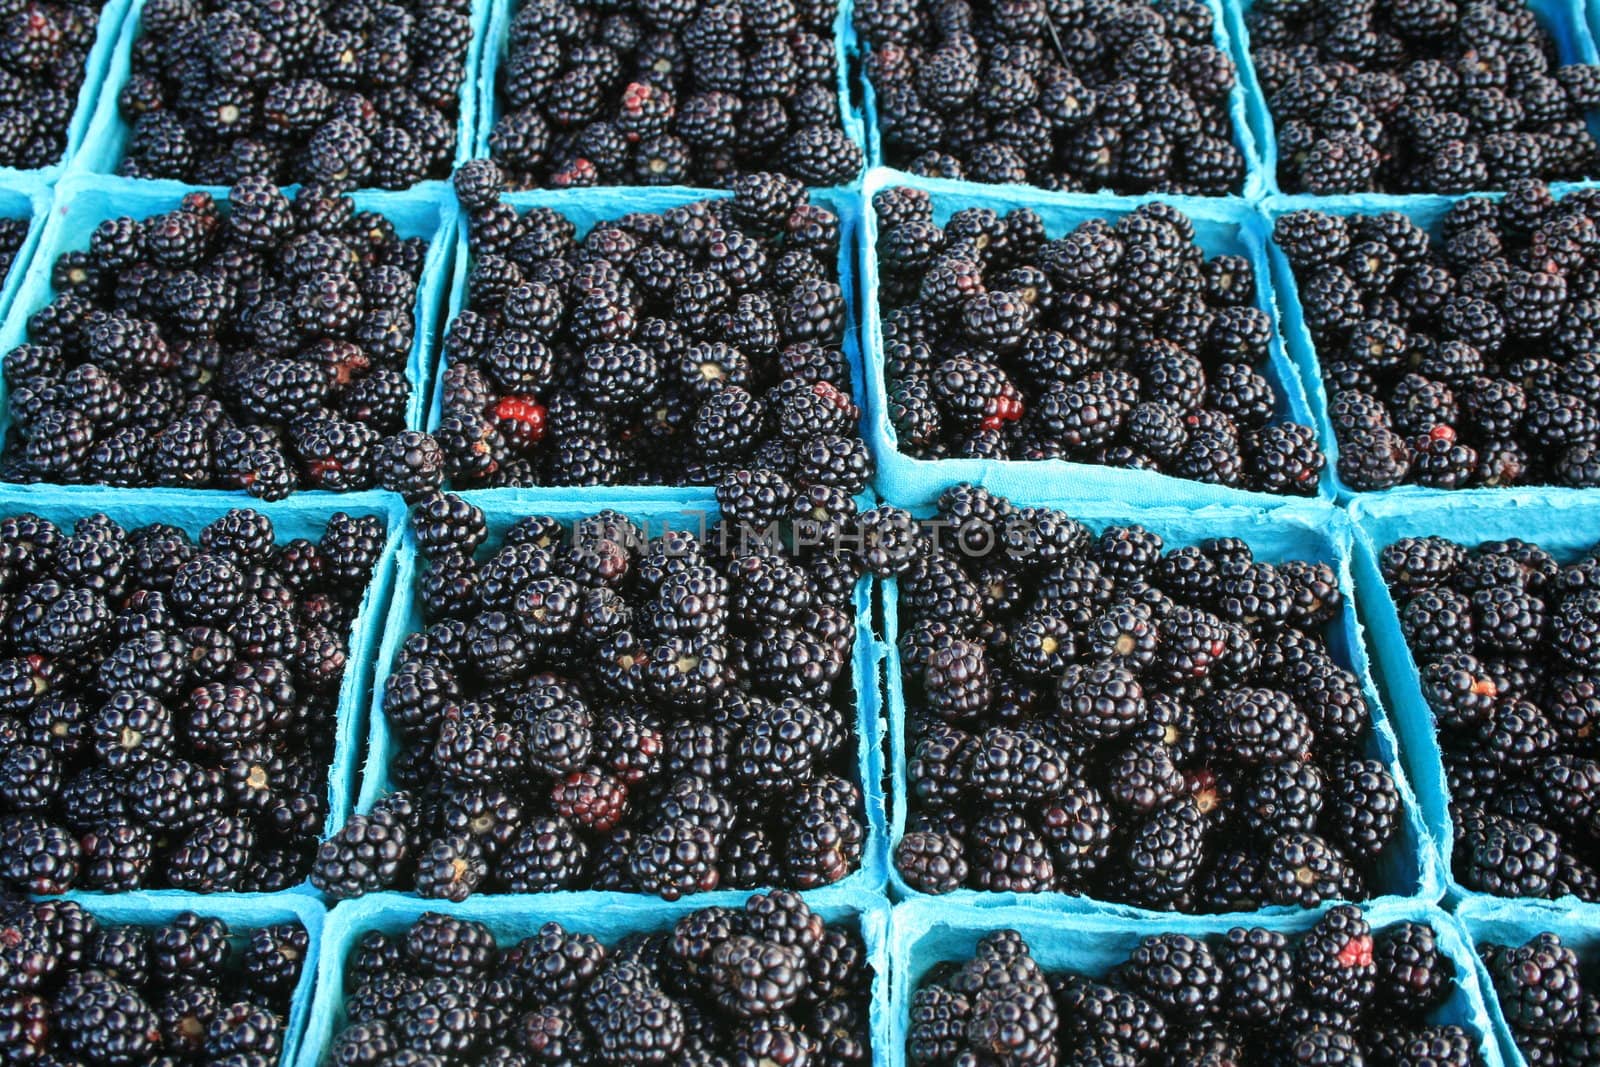 blue boxes of blackberries for sale at the farmers market